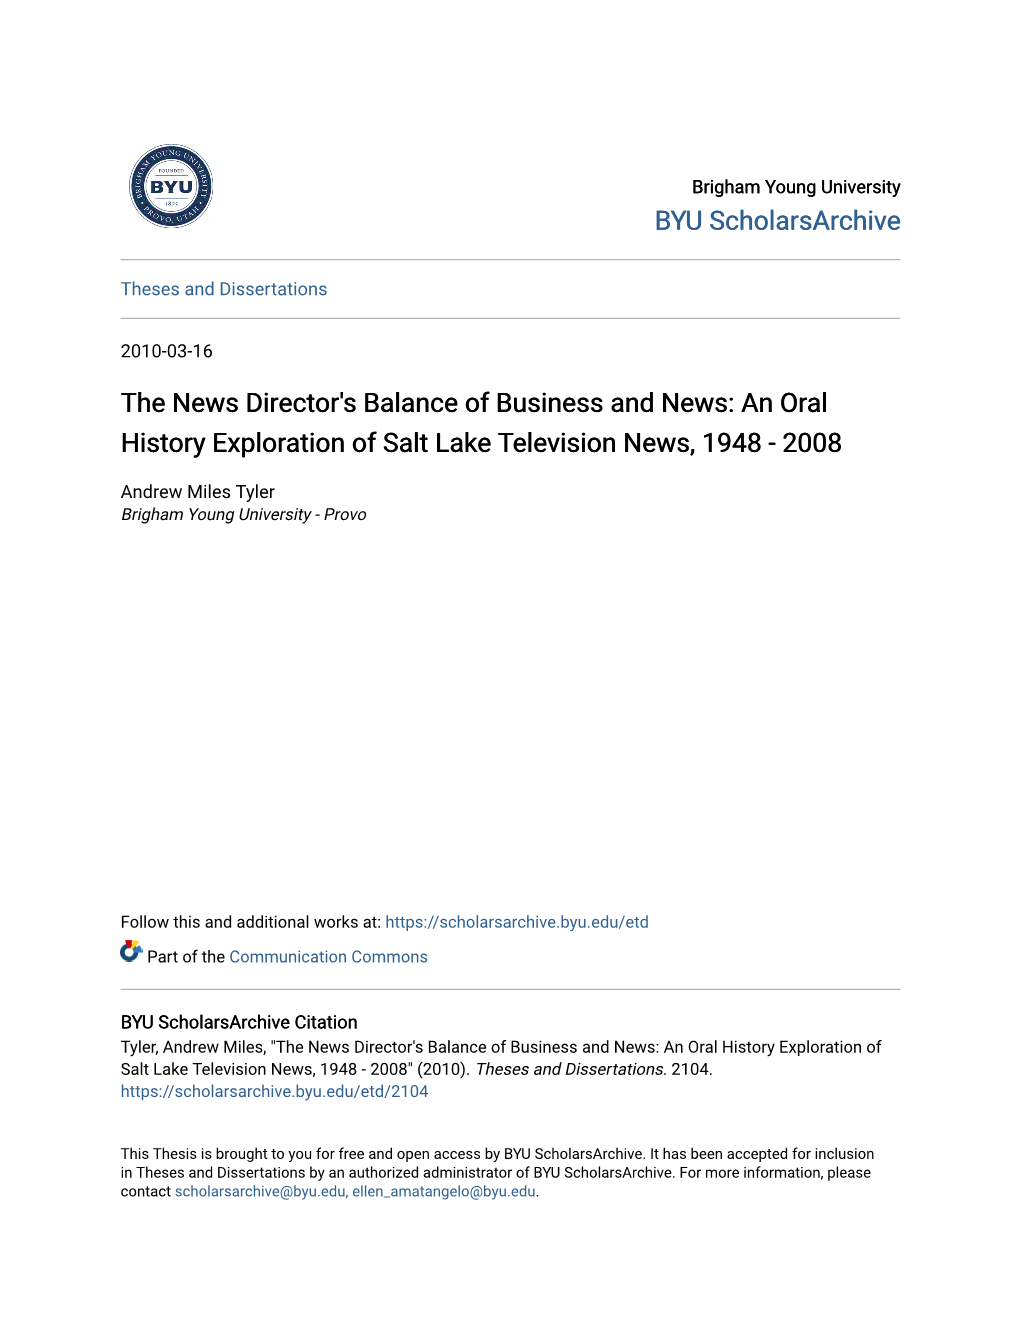 The News Director's Balance of Business and News: an Oral History Exploration of Salt Lake Television News, 1948 - 2008